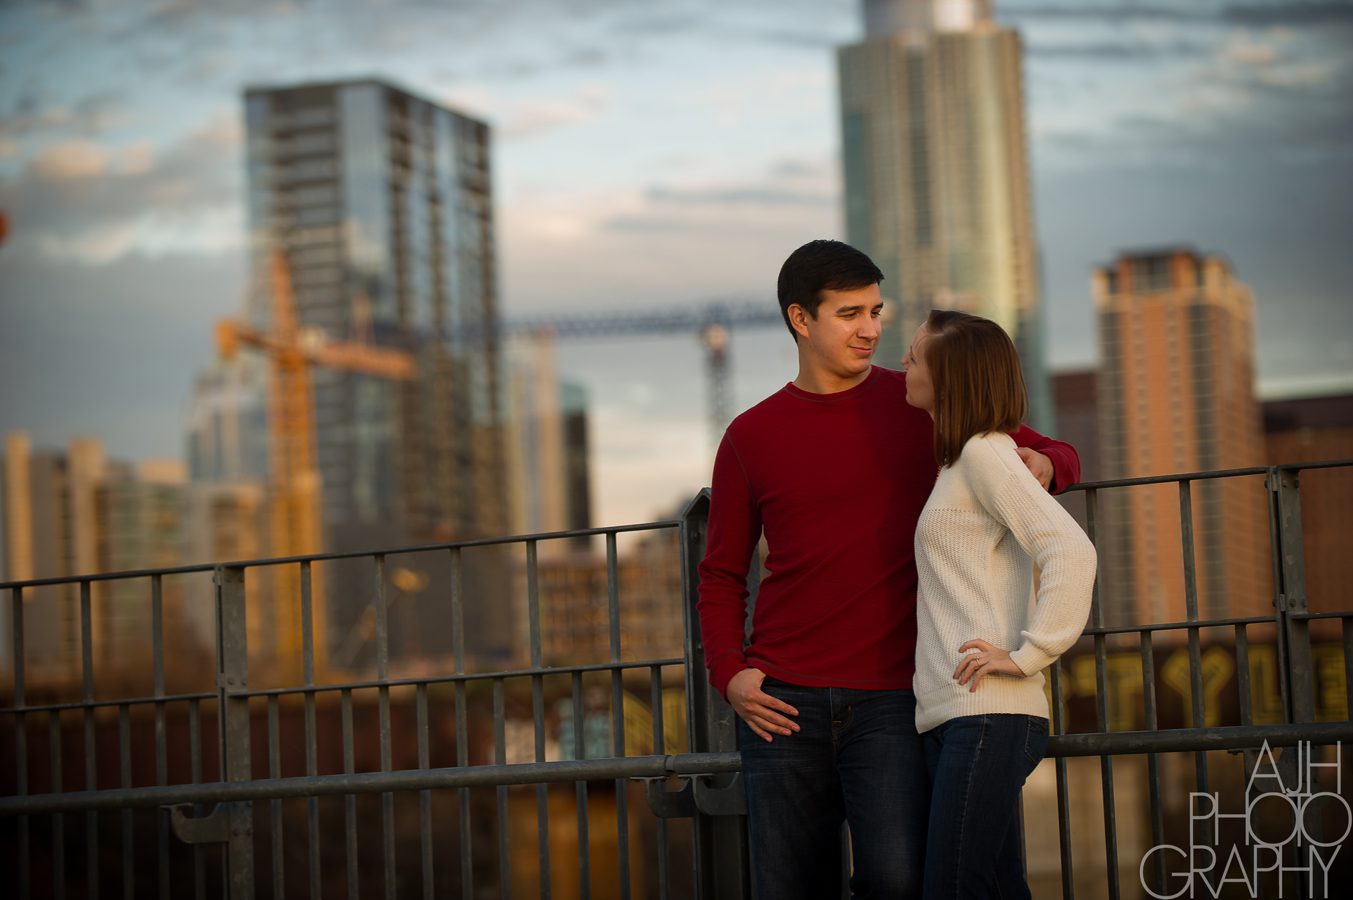 The W Austin Engagement Photography - AJH Photography